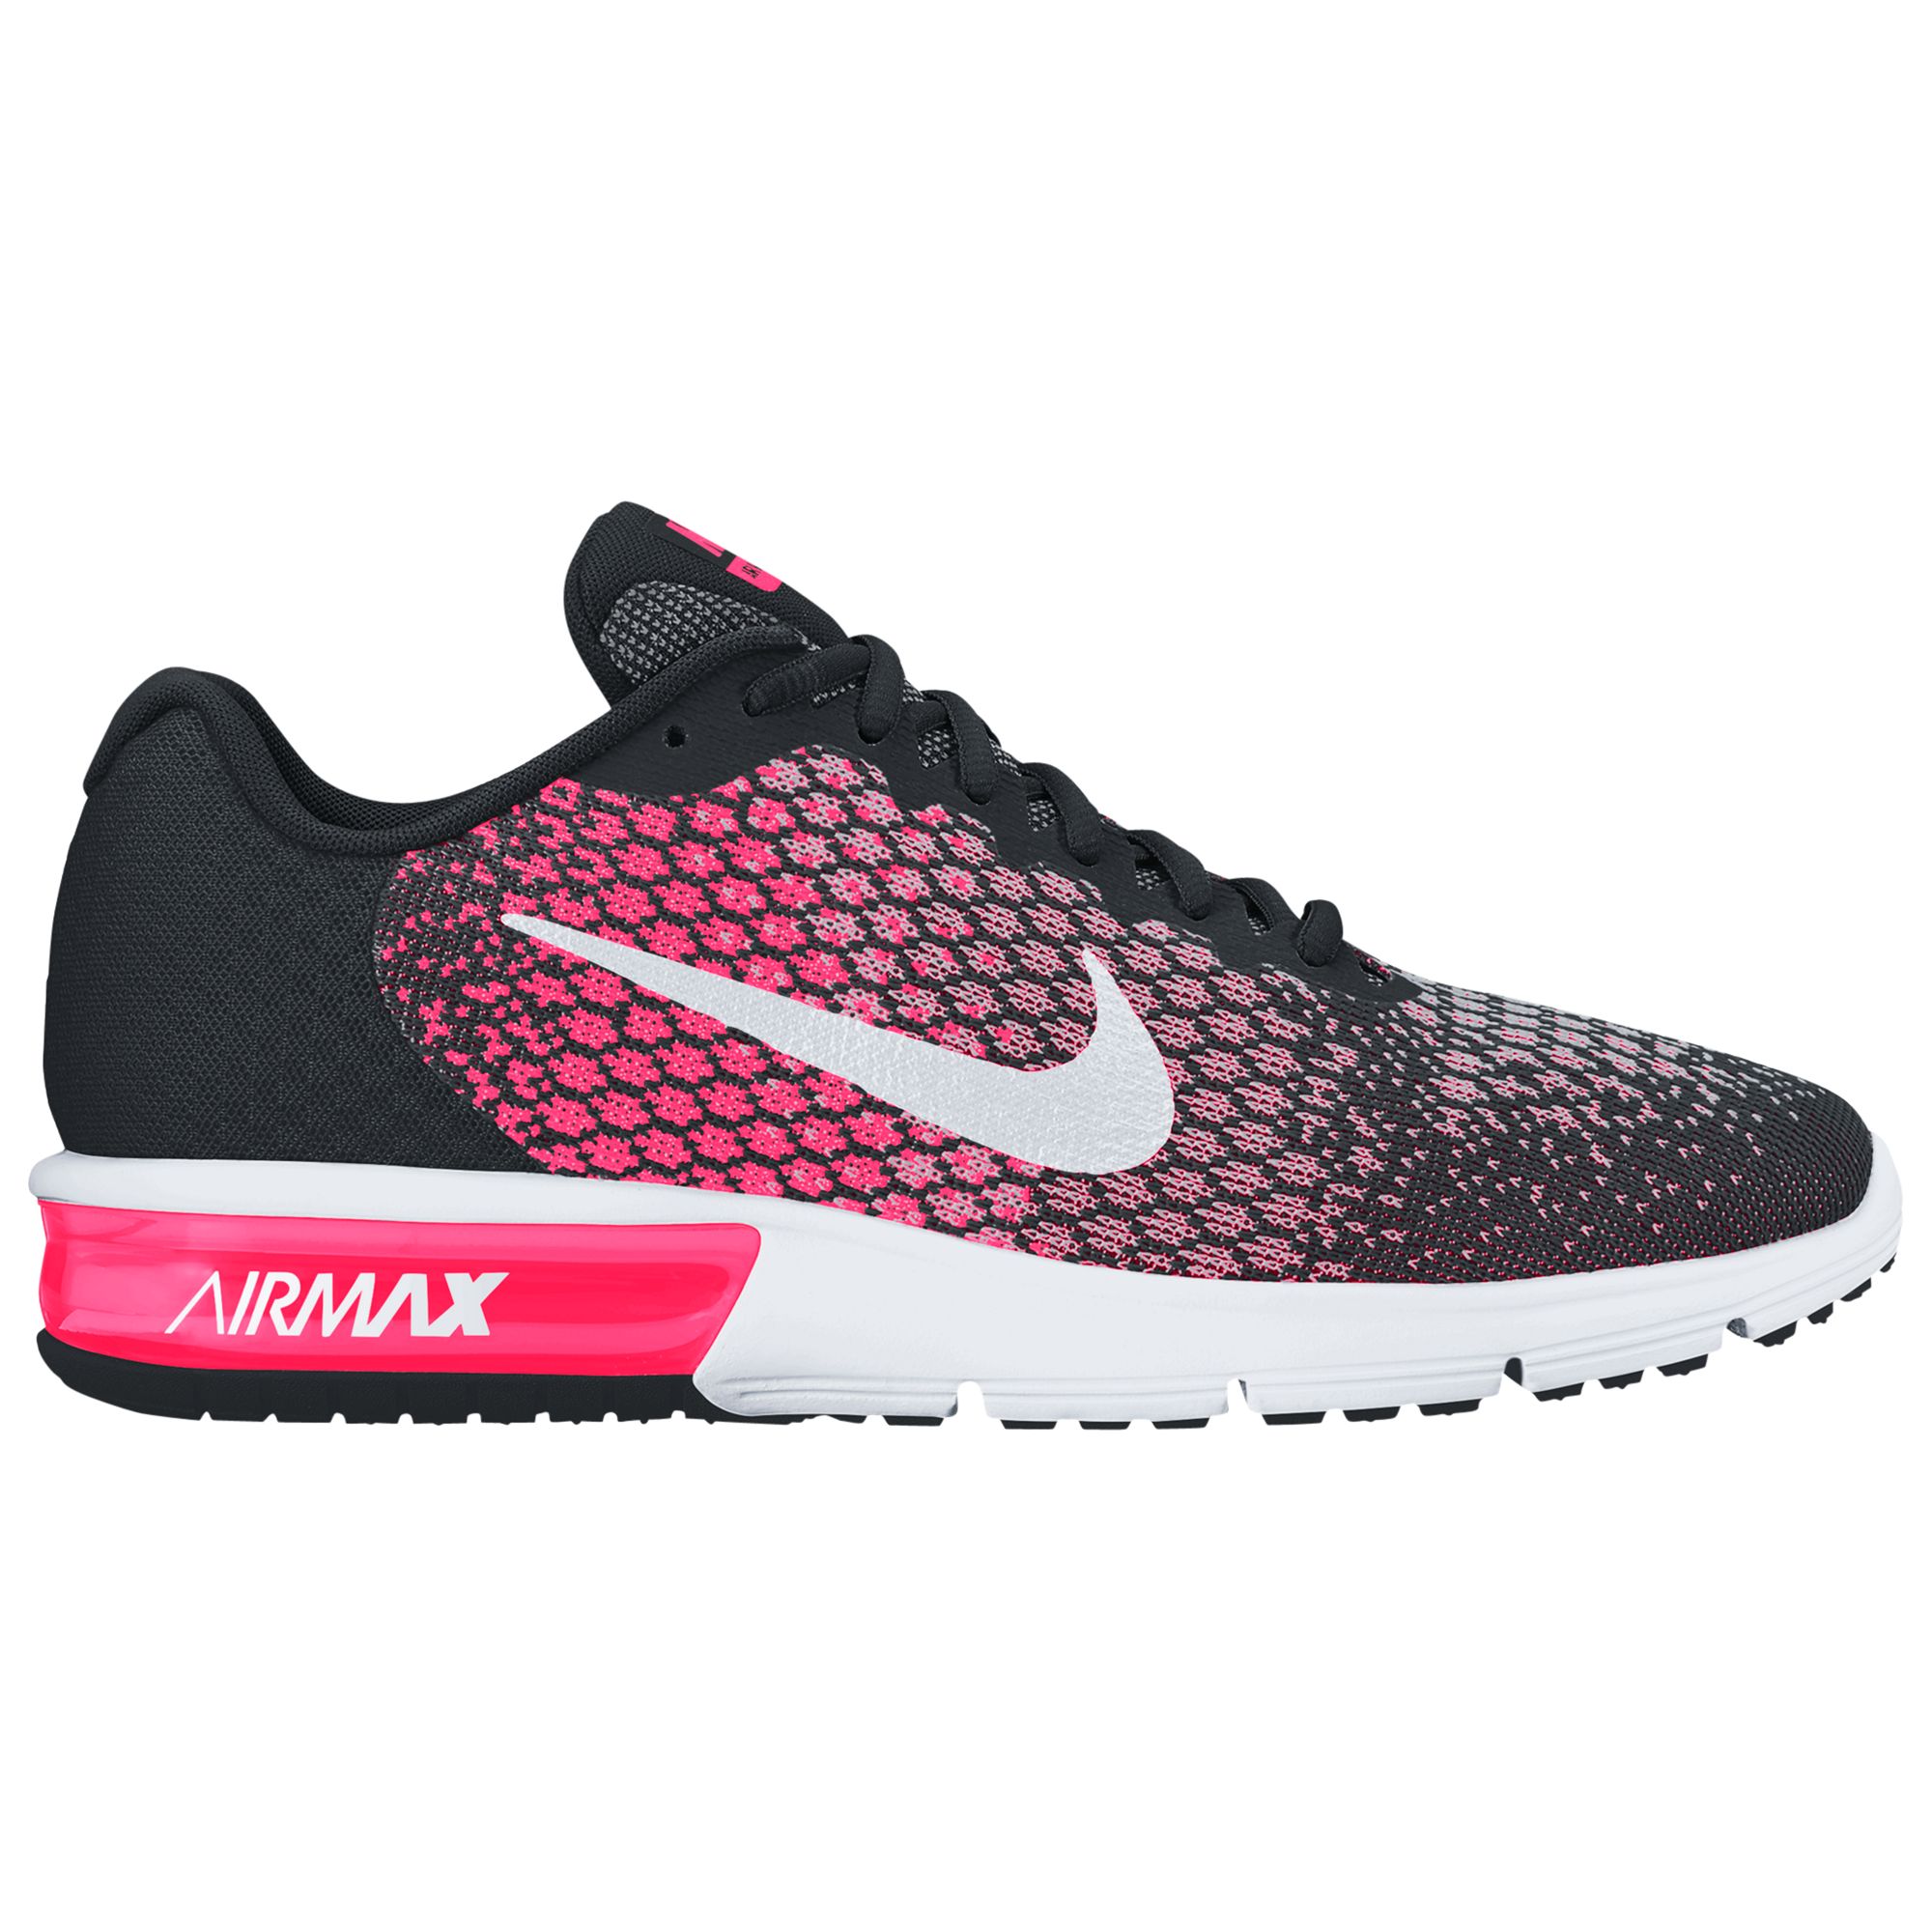 nike air max sequent women's running shoe